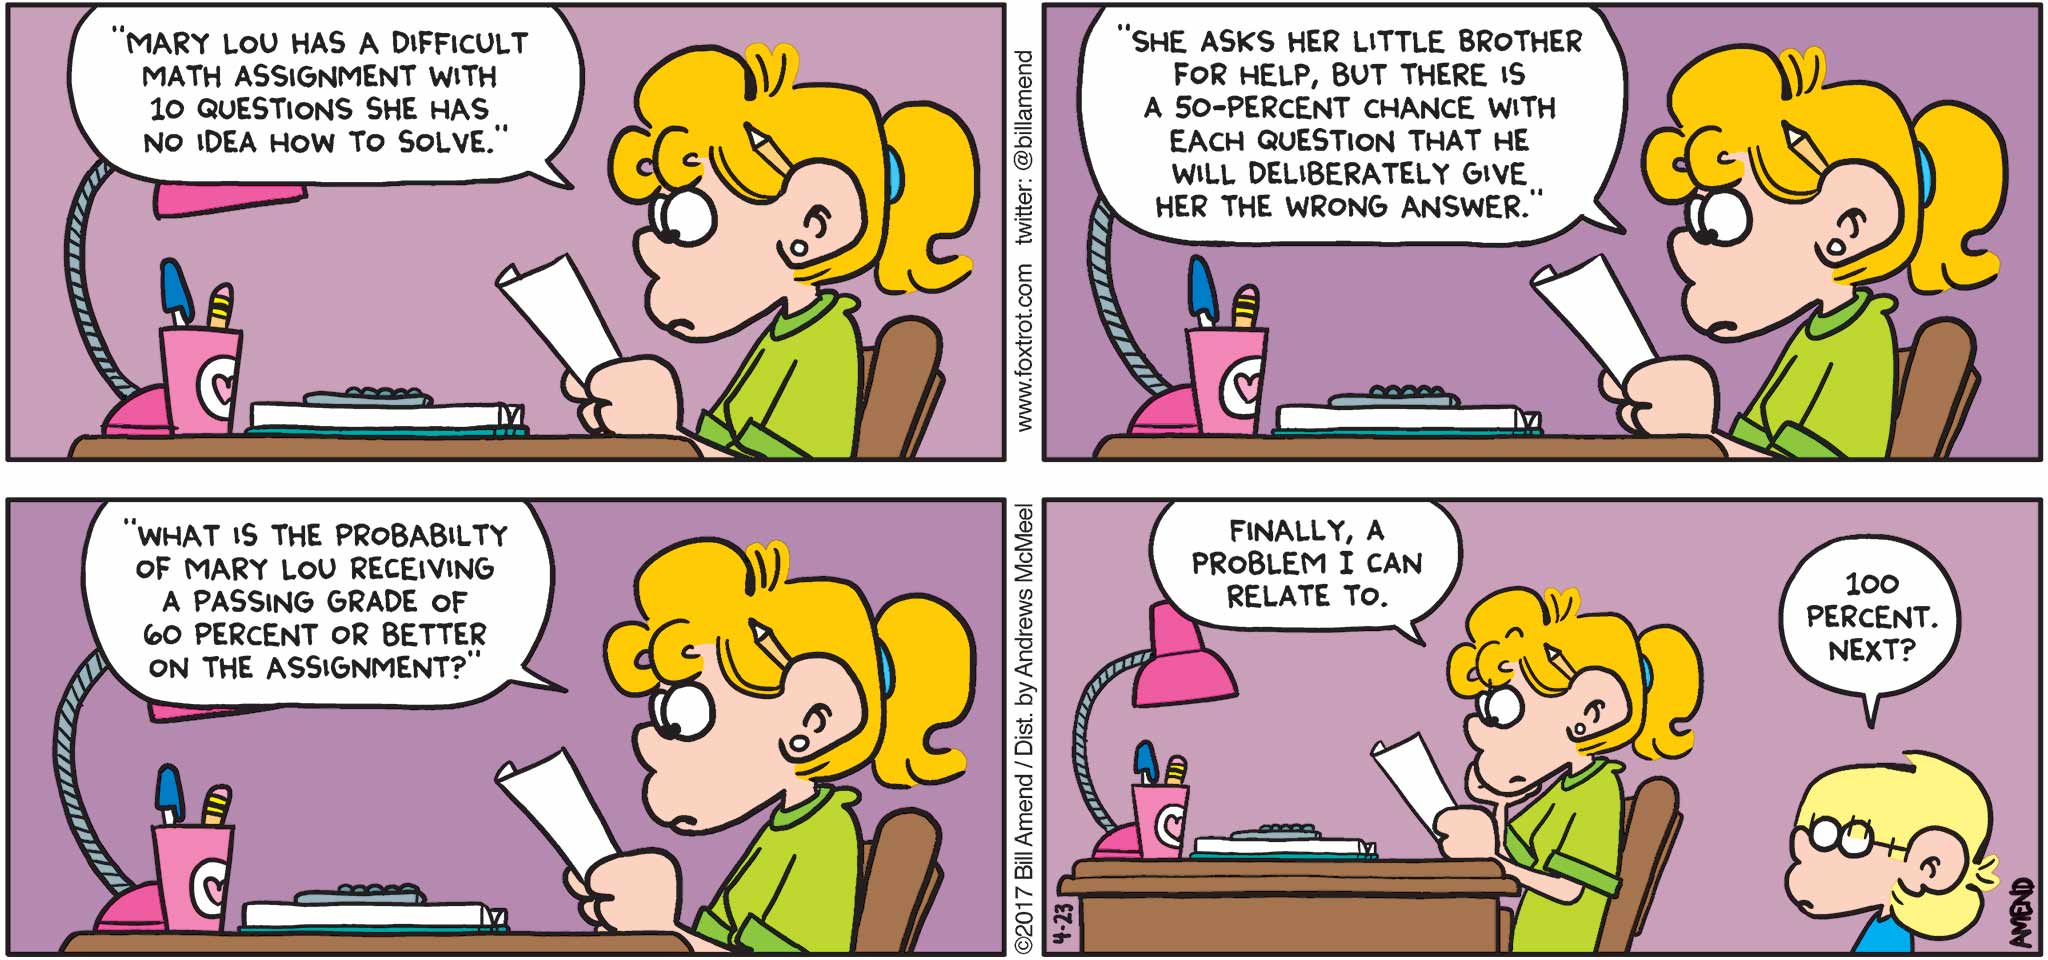 FoxTrot by Bill Amend - "Problematic" published April 23, 2017 - Paige says: "Mary Lou has a difficult math assignment with 10 questions she has no idea how to solve." "She asks her little brother for help, but there is a 50-percent chance with each question that he will deliberately give her the wrong answer." "What is the probability of Mary Lou receiving a passing grade of 60 percent or better on the assignment?" Paige says: Finally, a problem I can relate to. Jason says: 100 percent. Next?